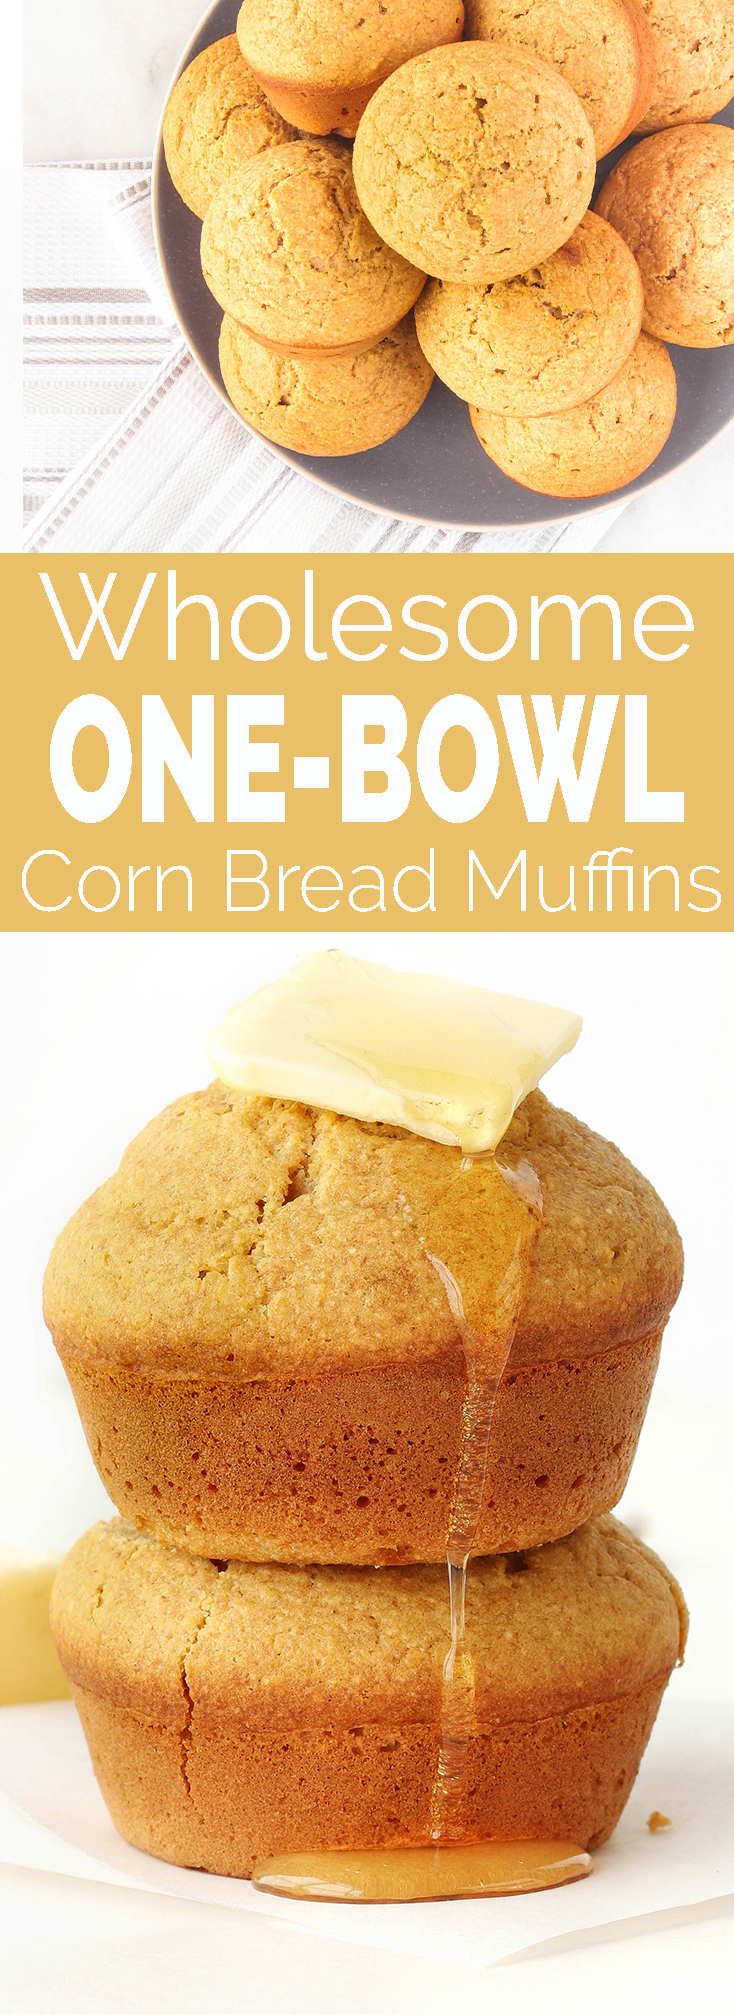 Easy, One-Bowl Corn Muffins sweetened naturally with honey. Tender, wholesome, and a delicious snack or side to savory entrees. #wholegrain